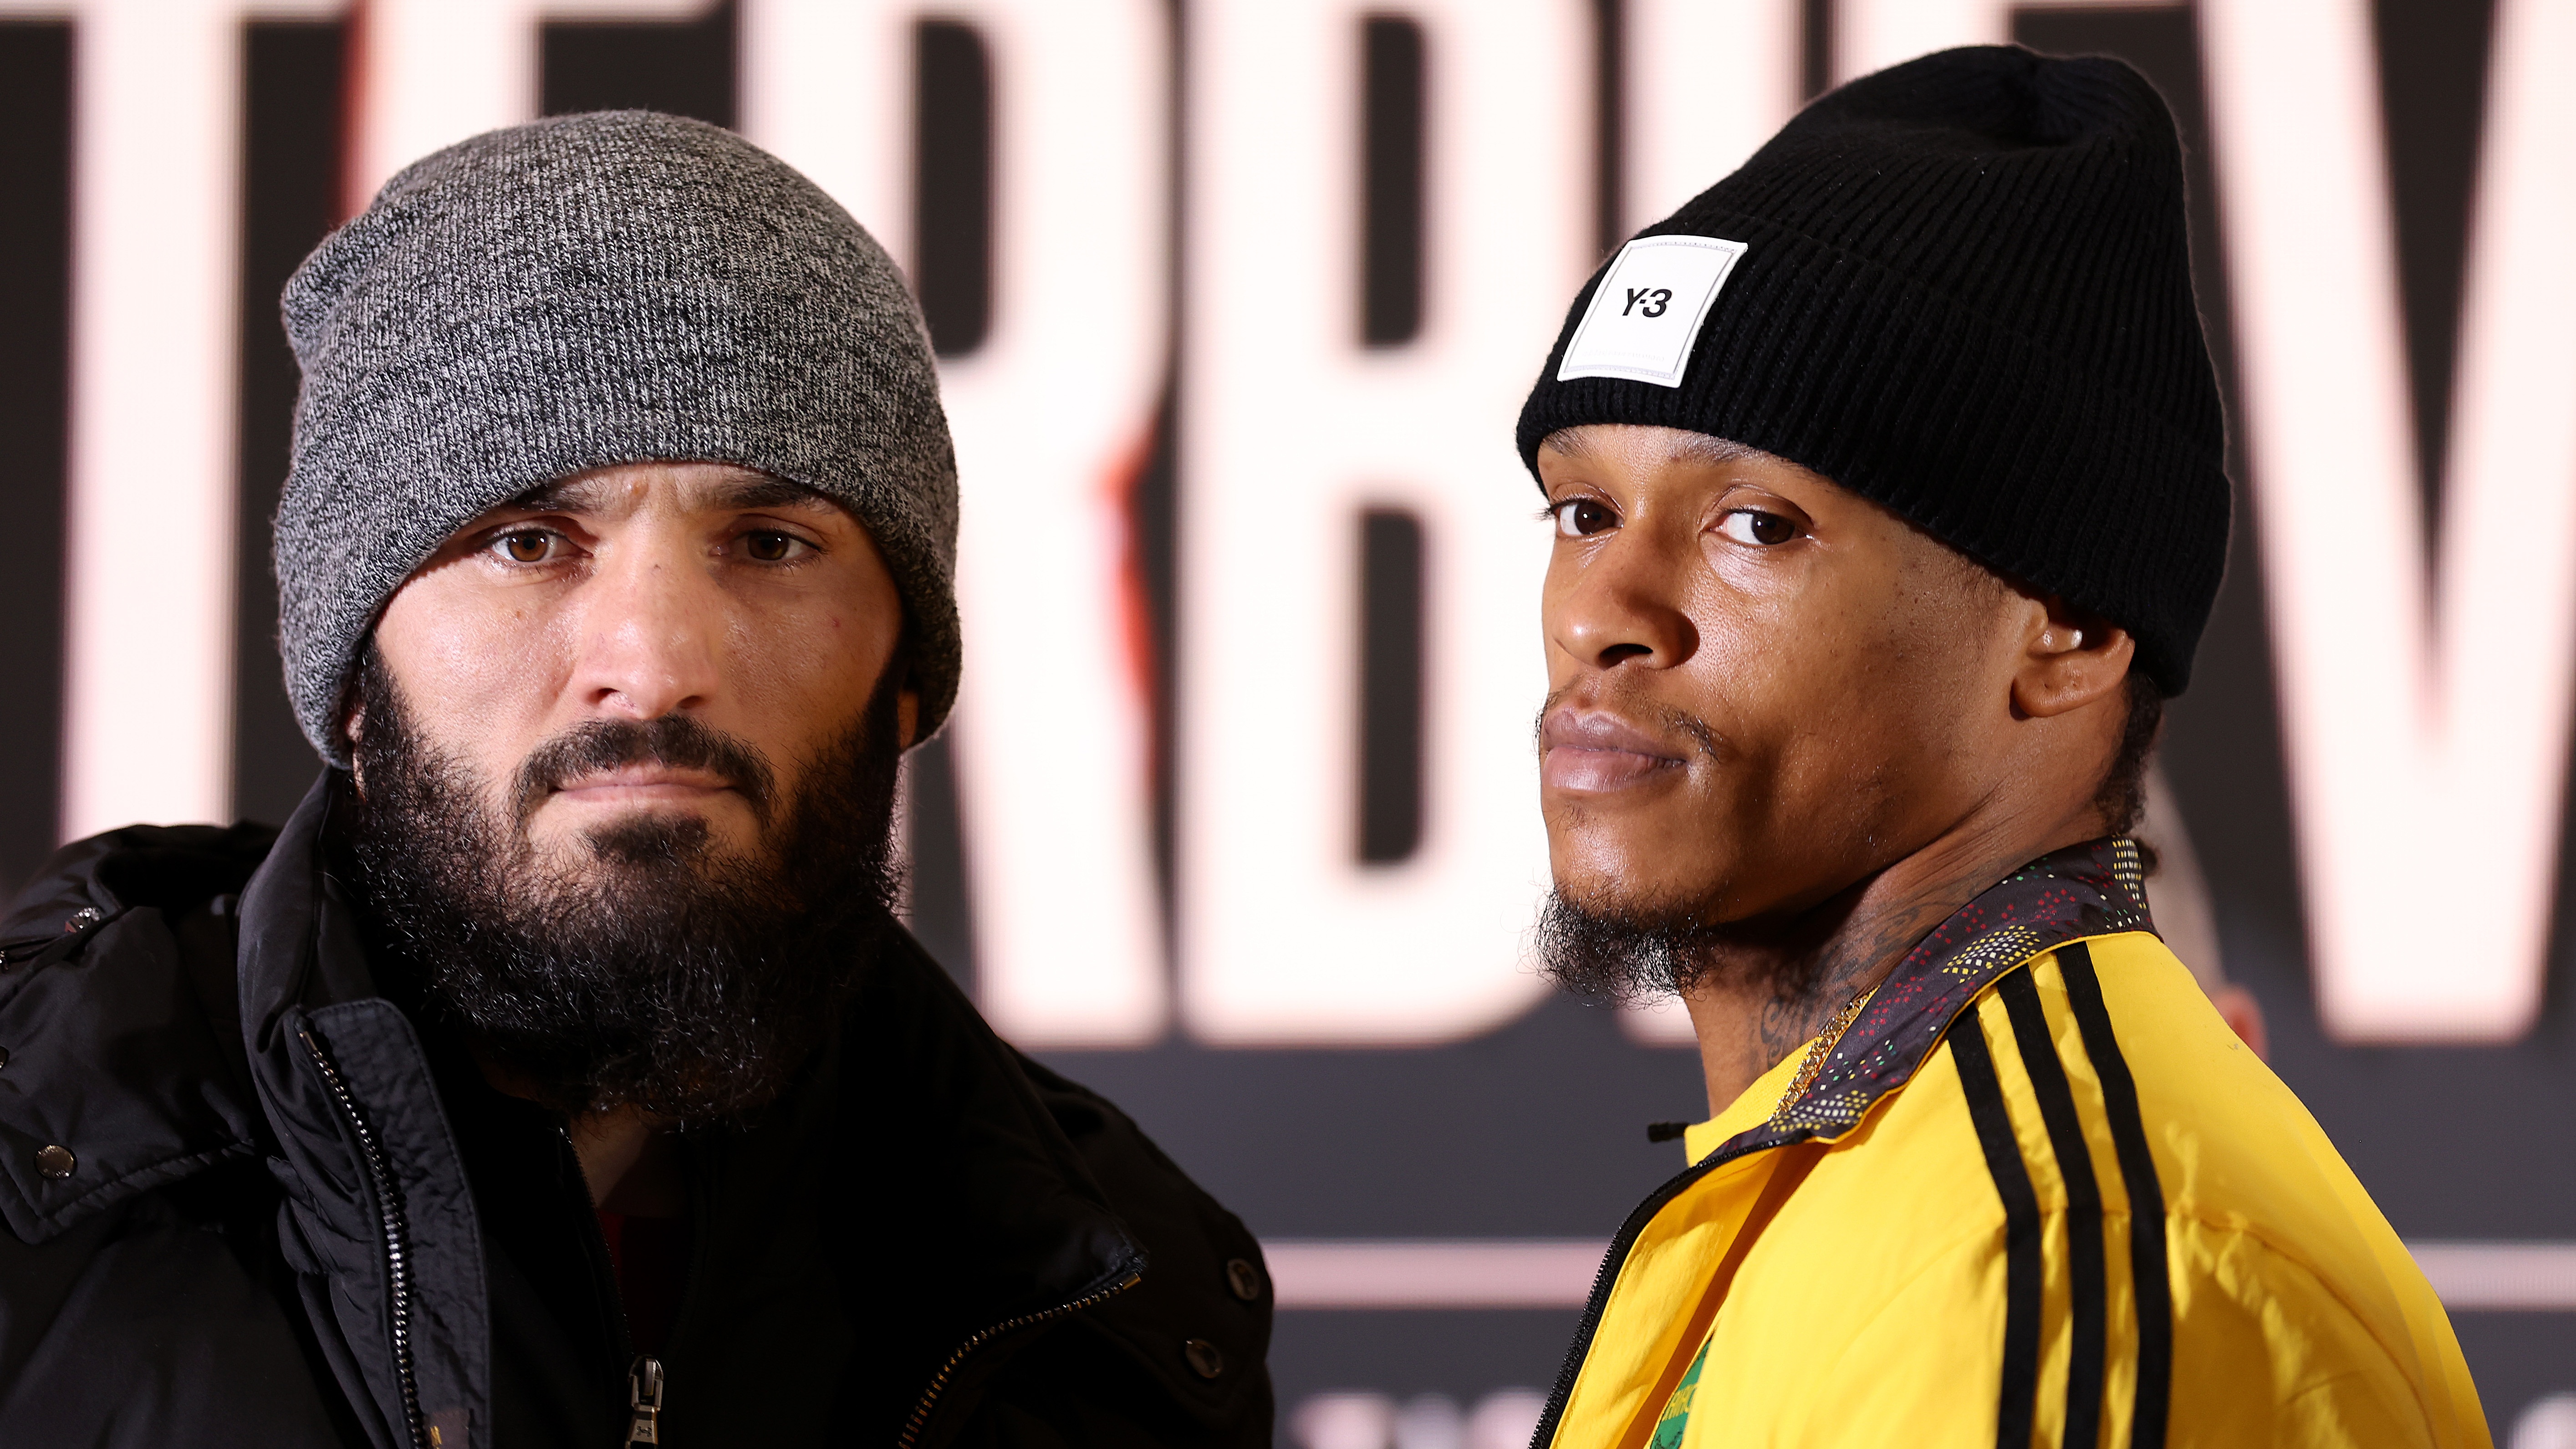 Beterbiev vs Yarde live stream how to watch the boxing at Wembley from anywhere TechRadar